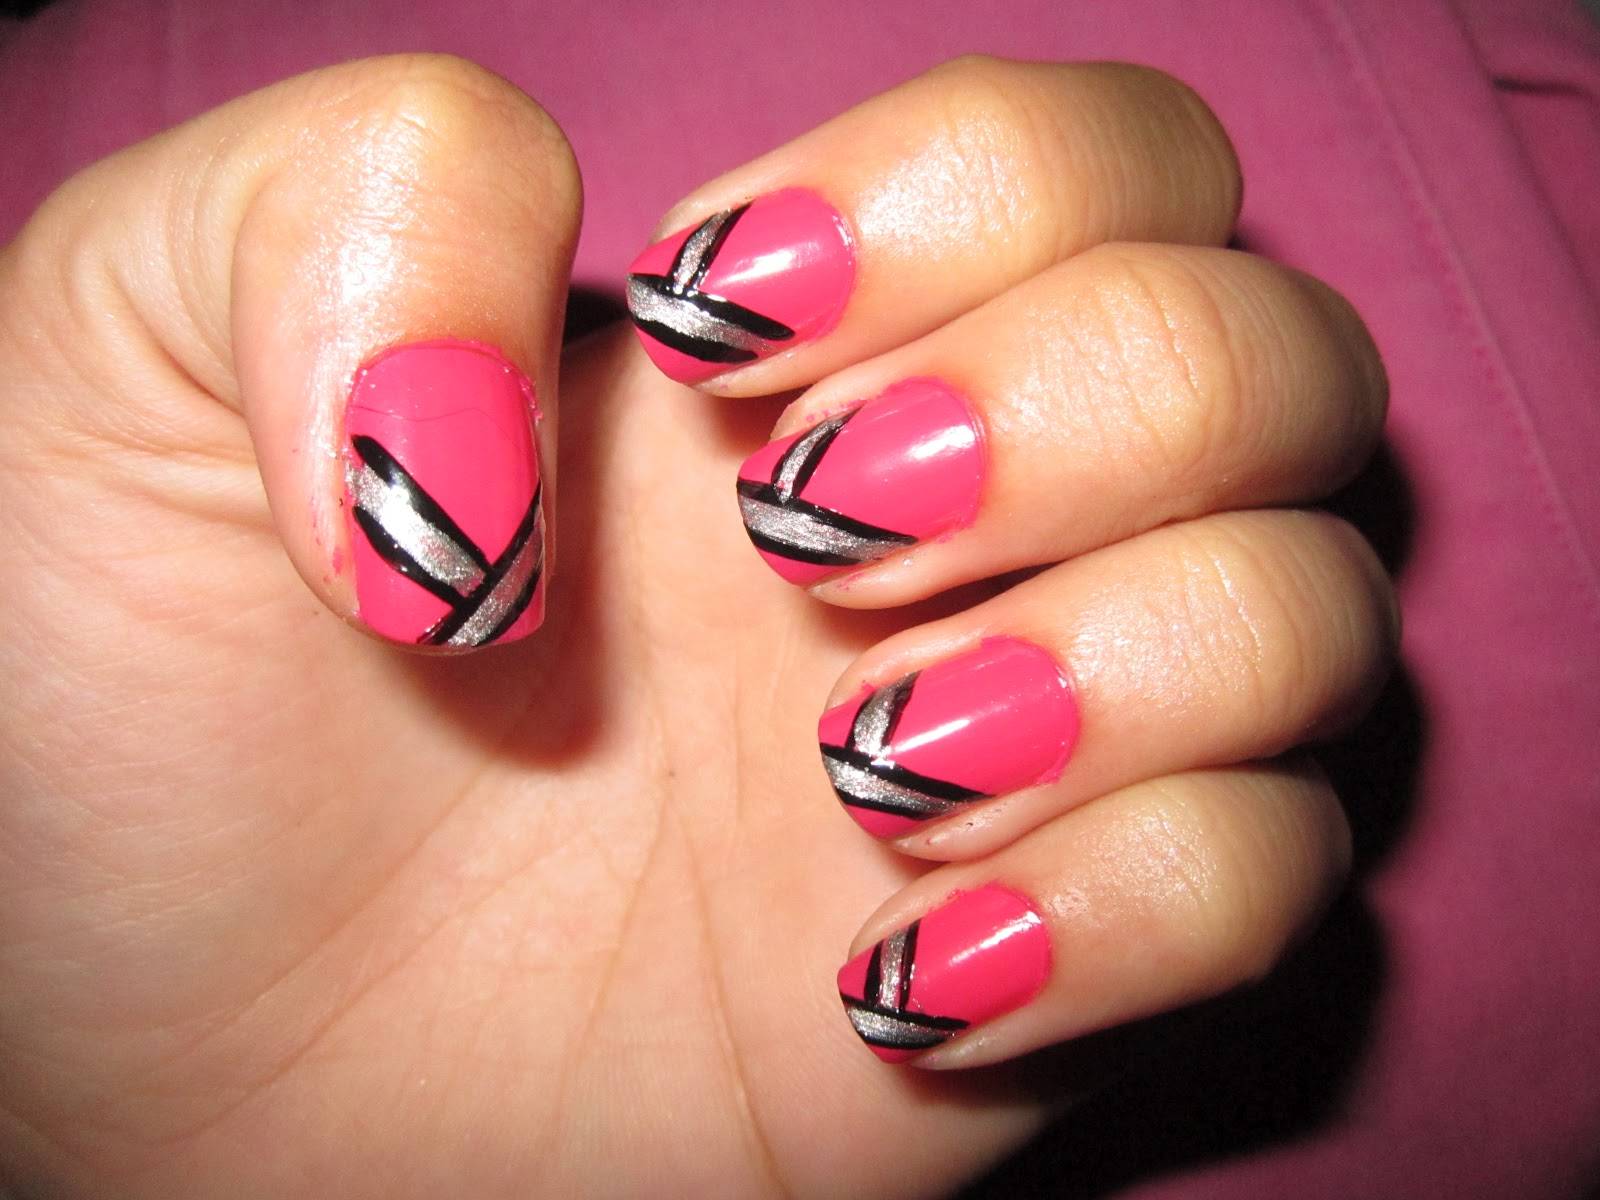 6. 10 Simple Nail Art Designs for Beginners - wide 8